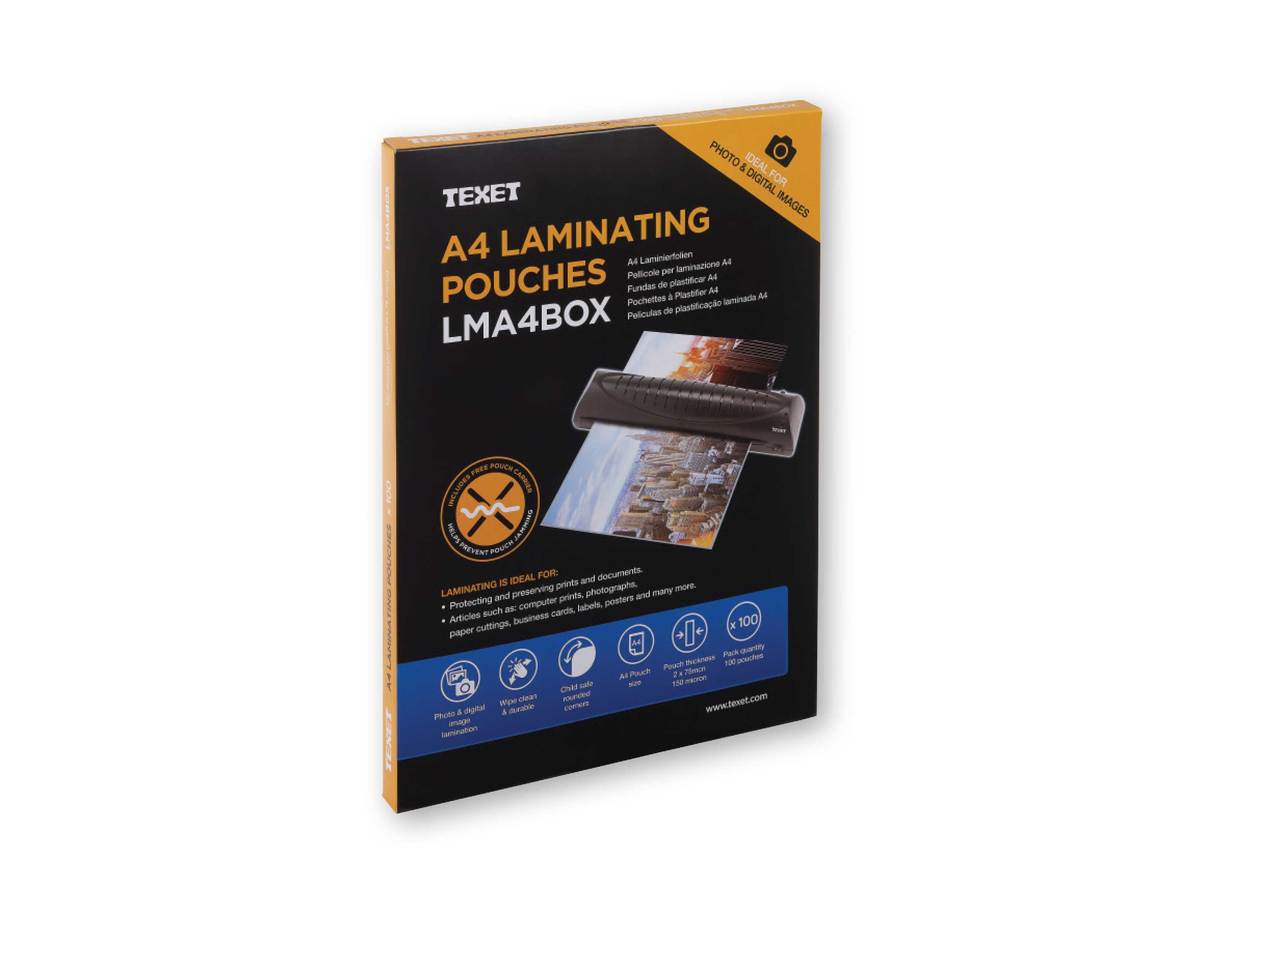 TEXET A4 Laminating Pouches